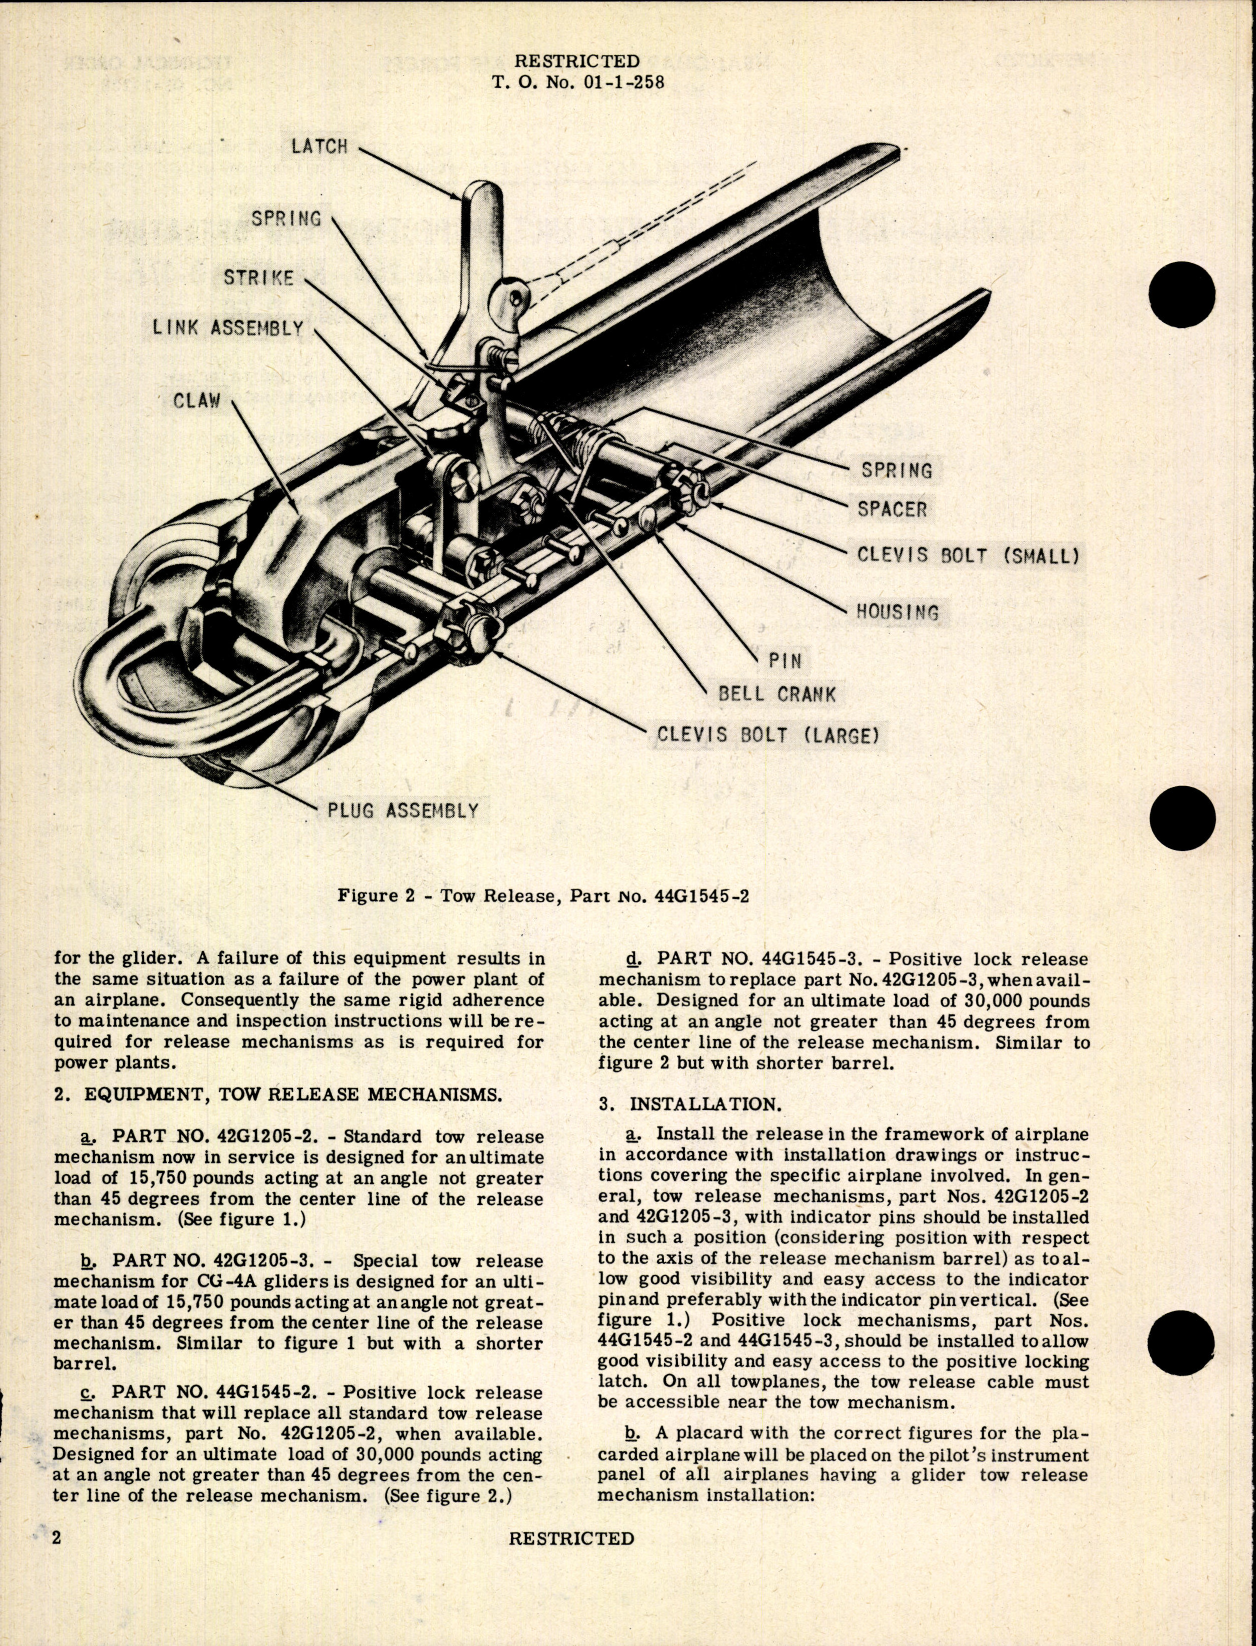 Sample page 2 from AirCorps Library document: Installation, Maintenance, Inspection, and Operation of Glider Tow release Mechanisms